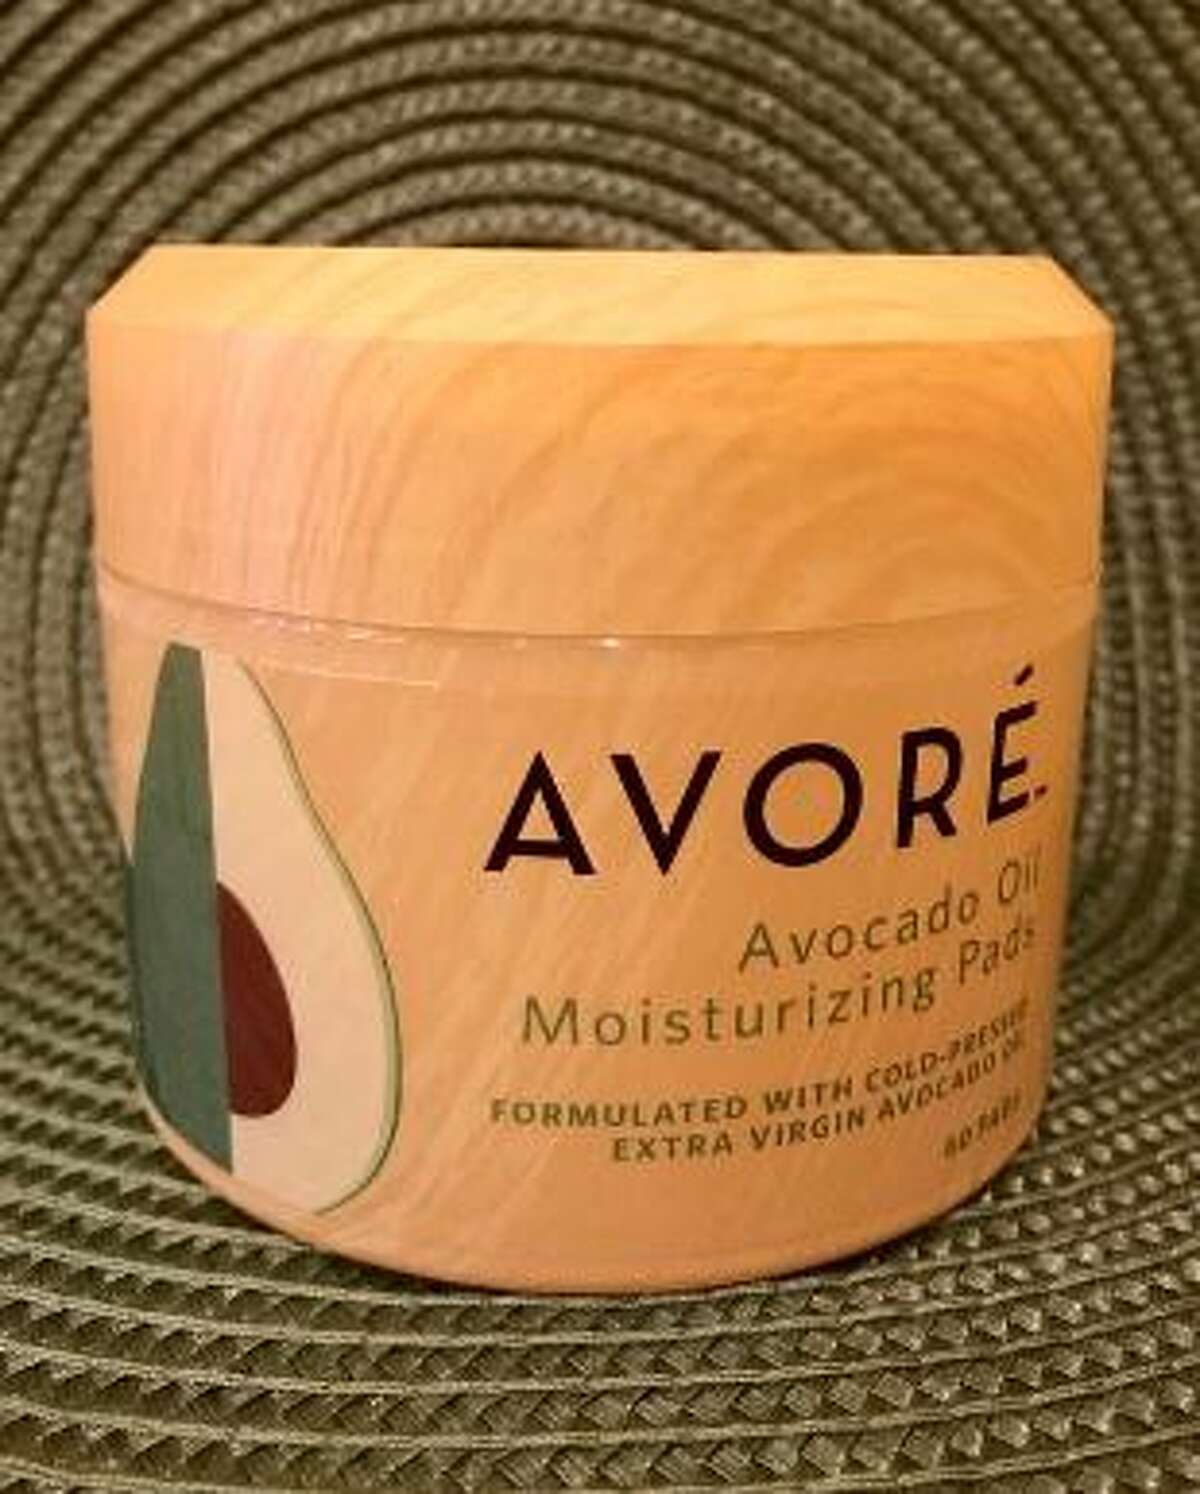 Shown is the Avoré avocado oil moisturizing product that will be presented on June 27 on QVC.